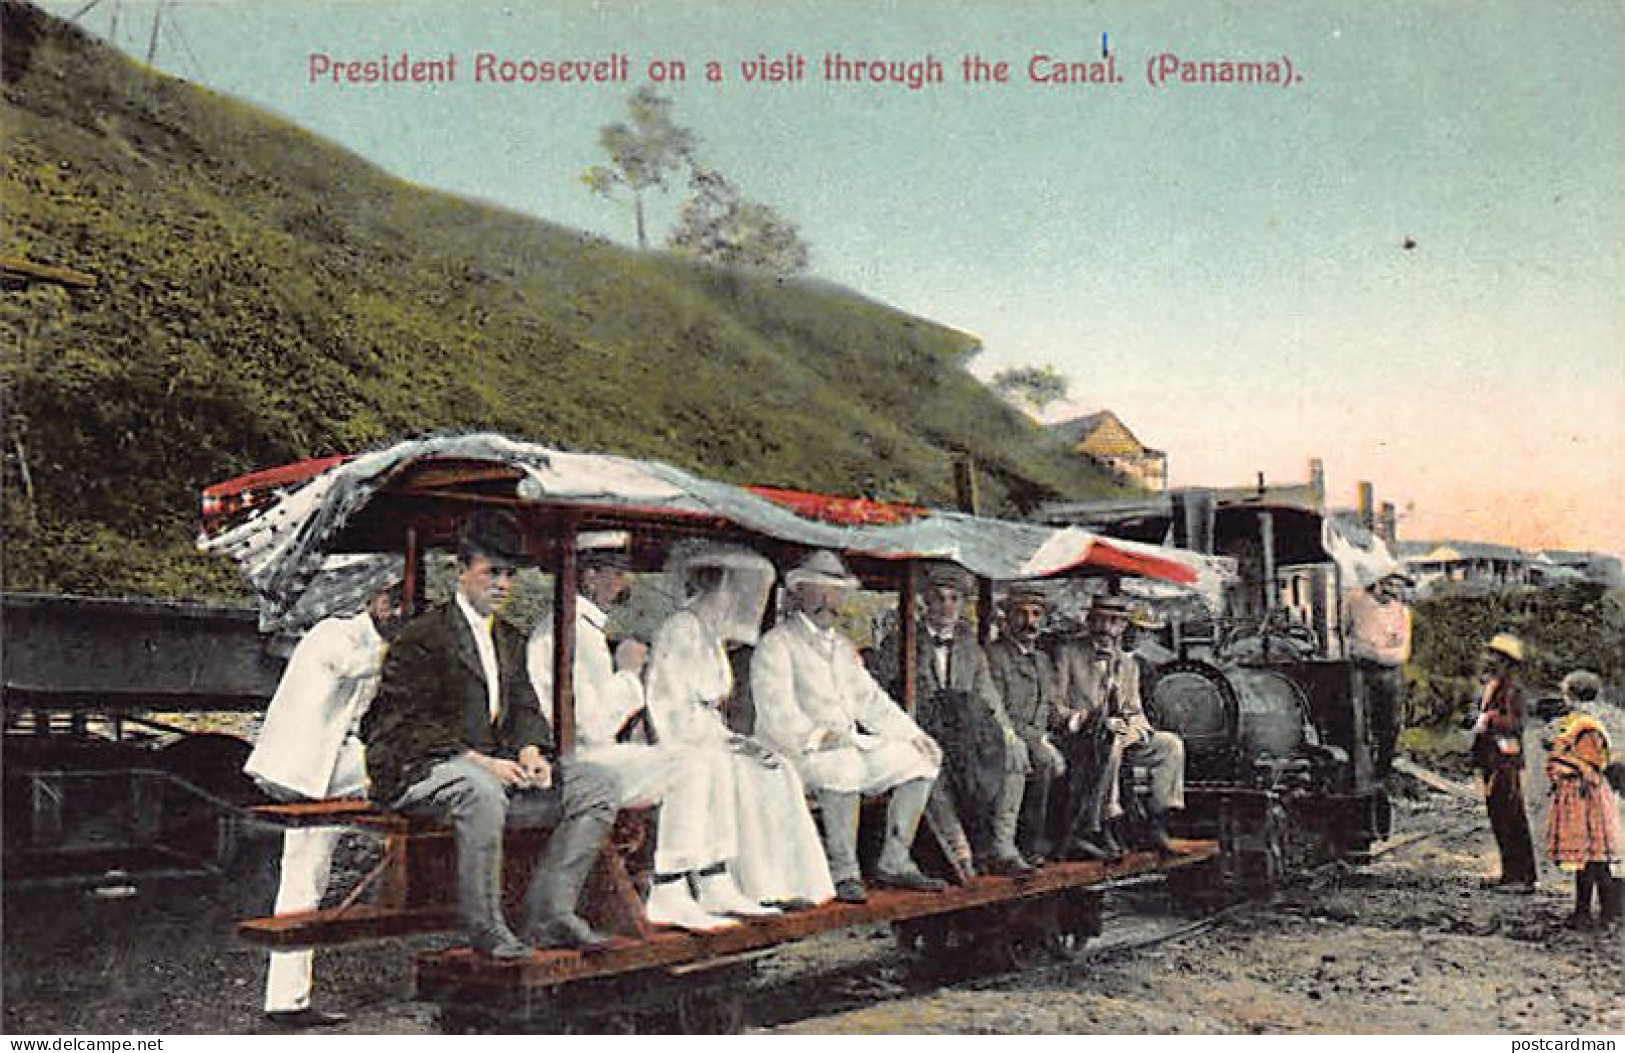 Canal De Panamá - President Roosevelt On The Visit Trough The Canal - Decauville Narrow-gauge Train - Publ. I. L. Maduro - Panama